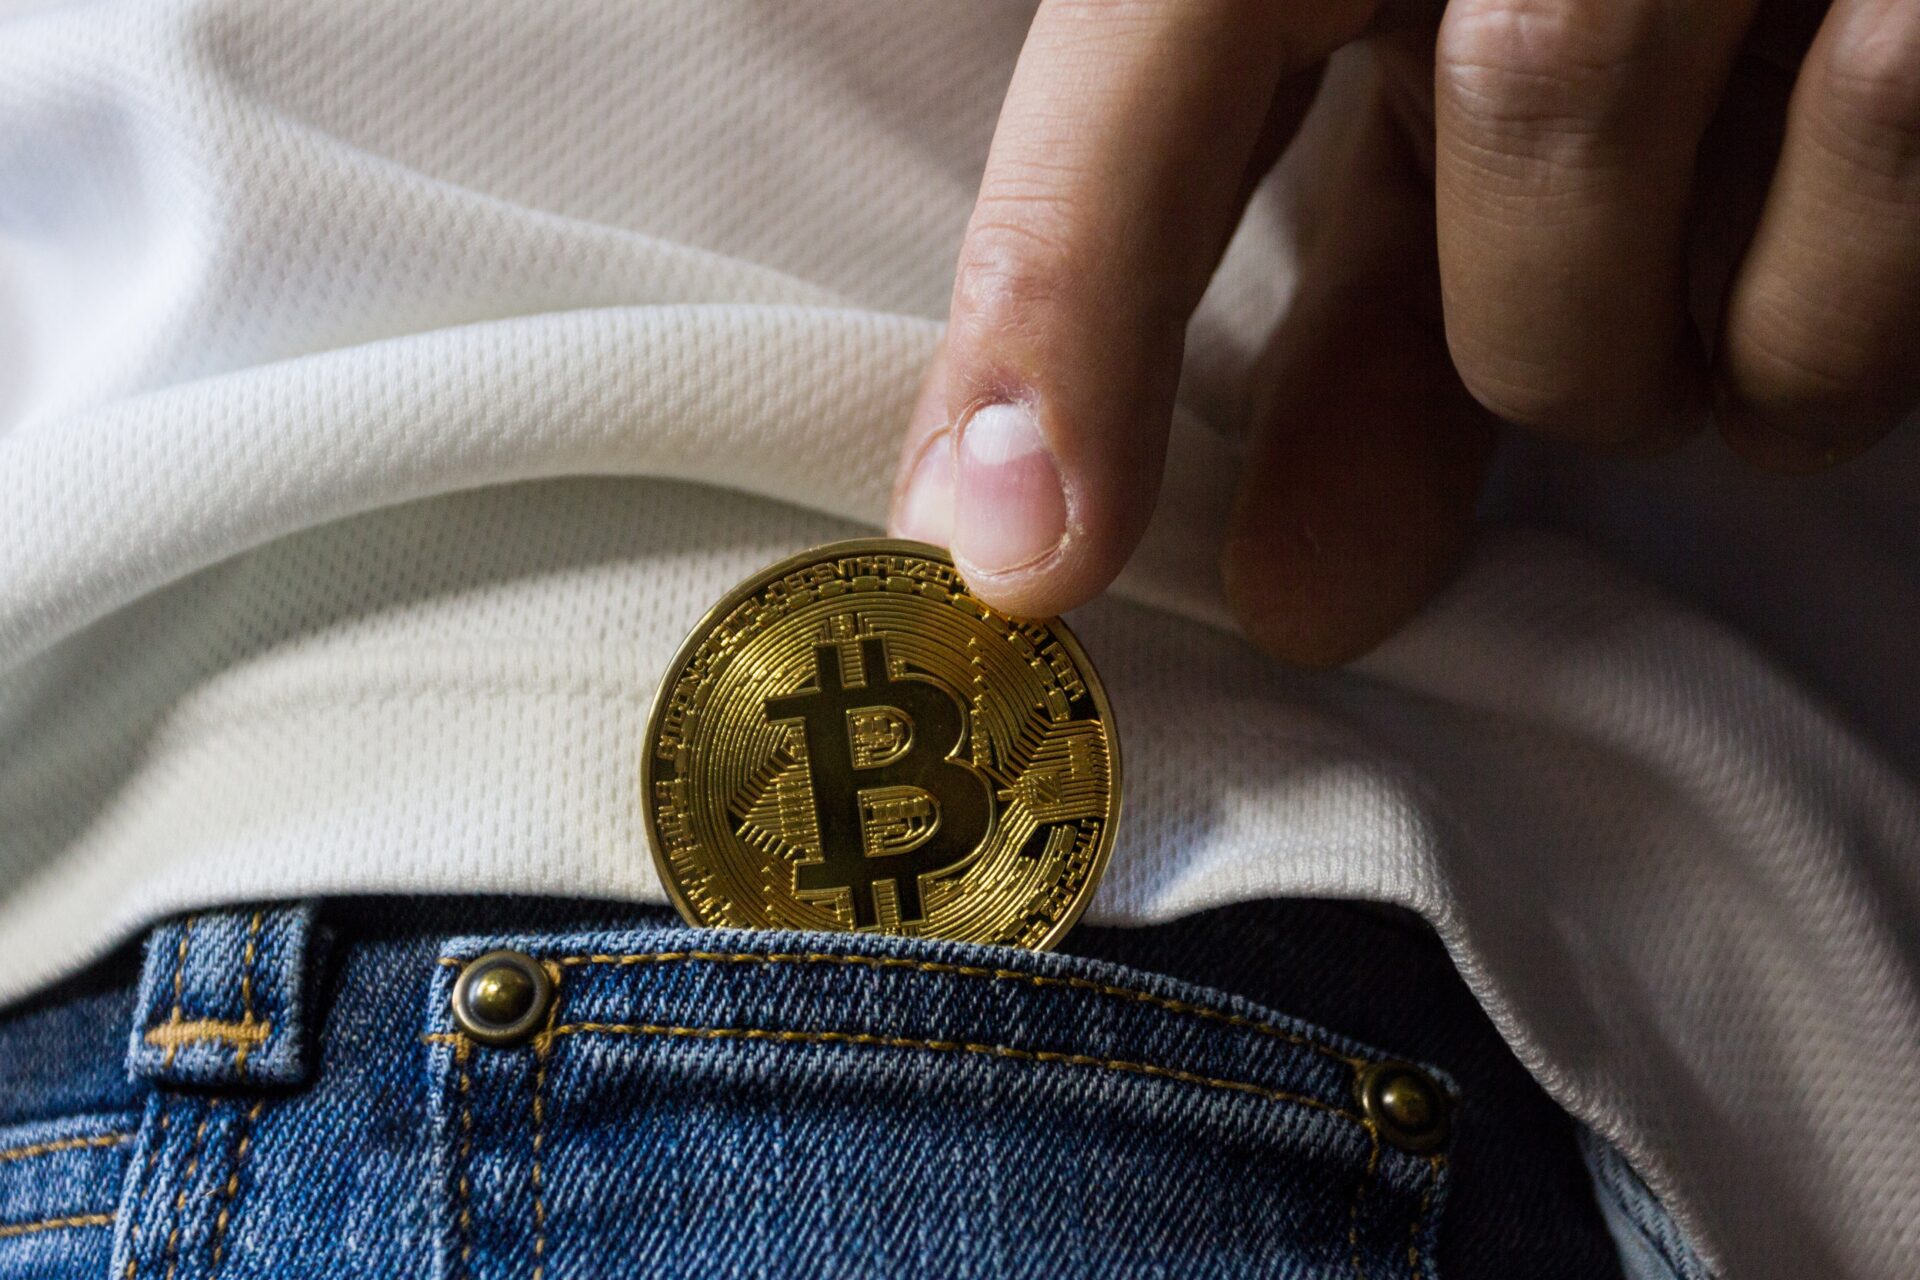 is it legal to buy private goods with bitcoin